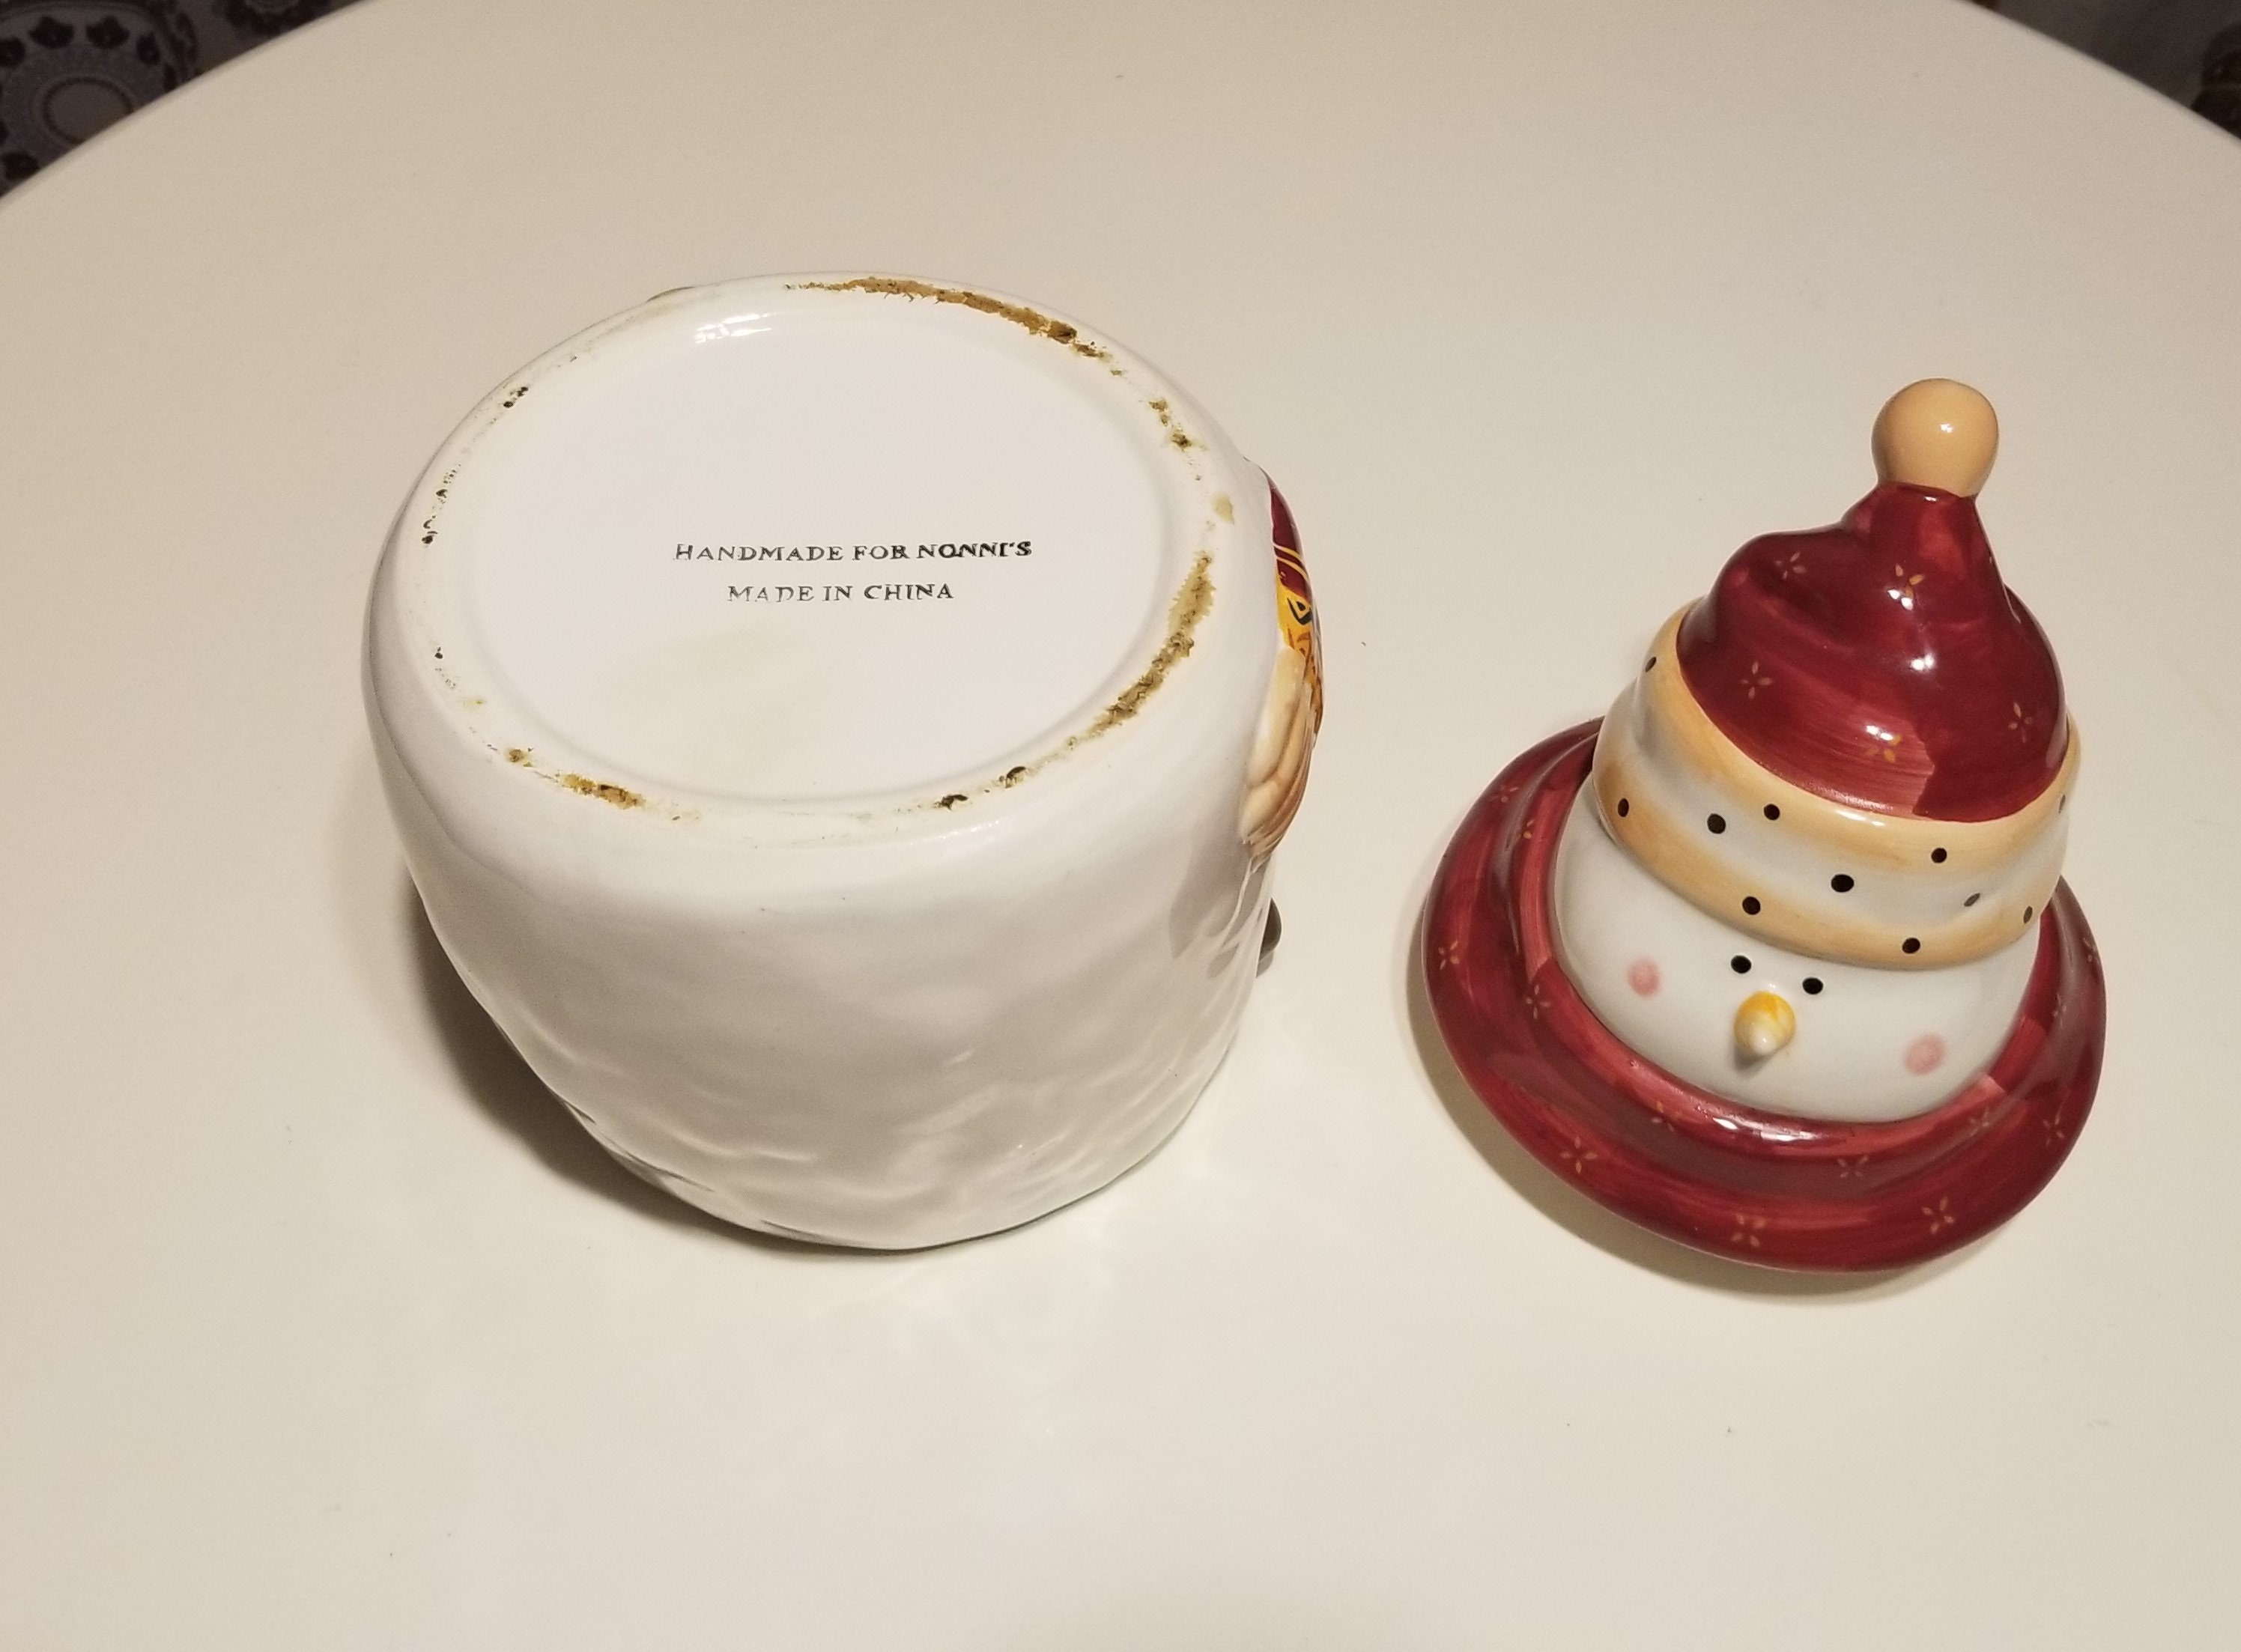 RARE UNIVERSITY OF TENNESSEE HANDPAINTED SNOWMAN SMALL COOKIE or